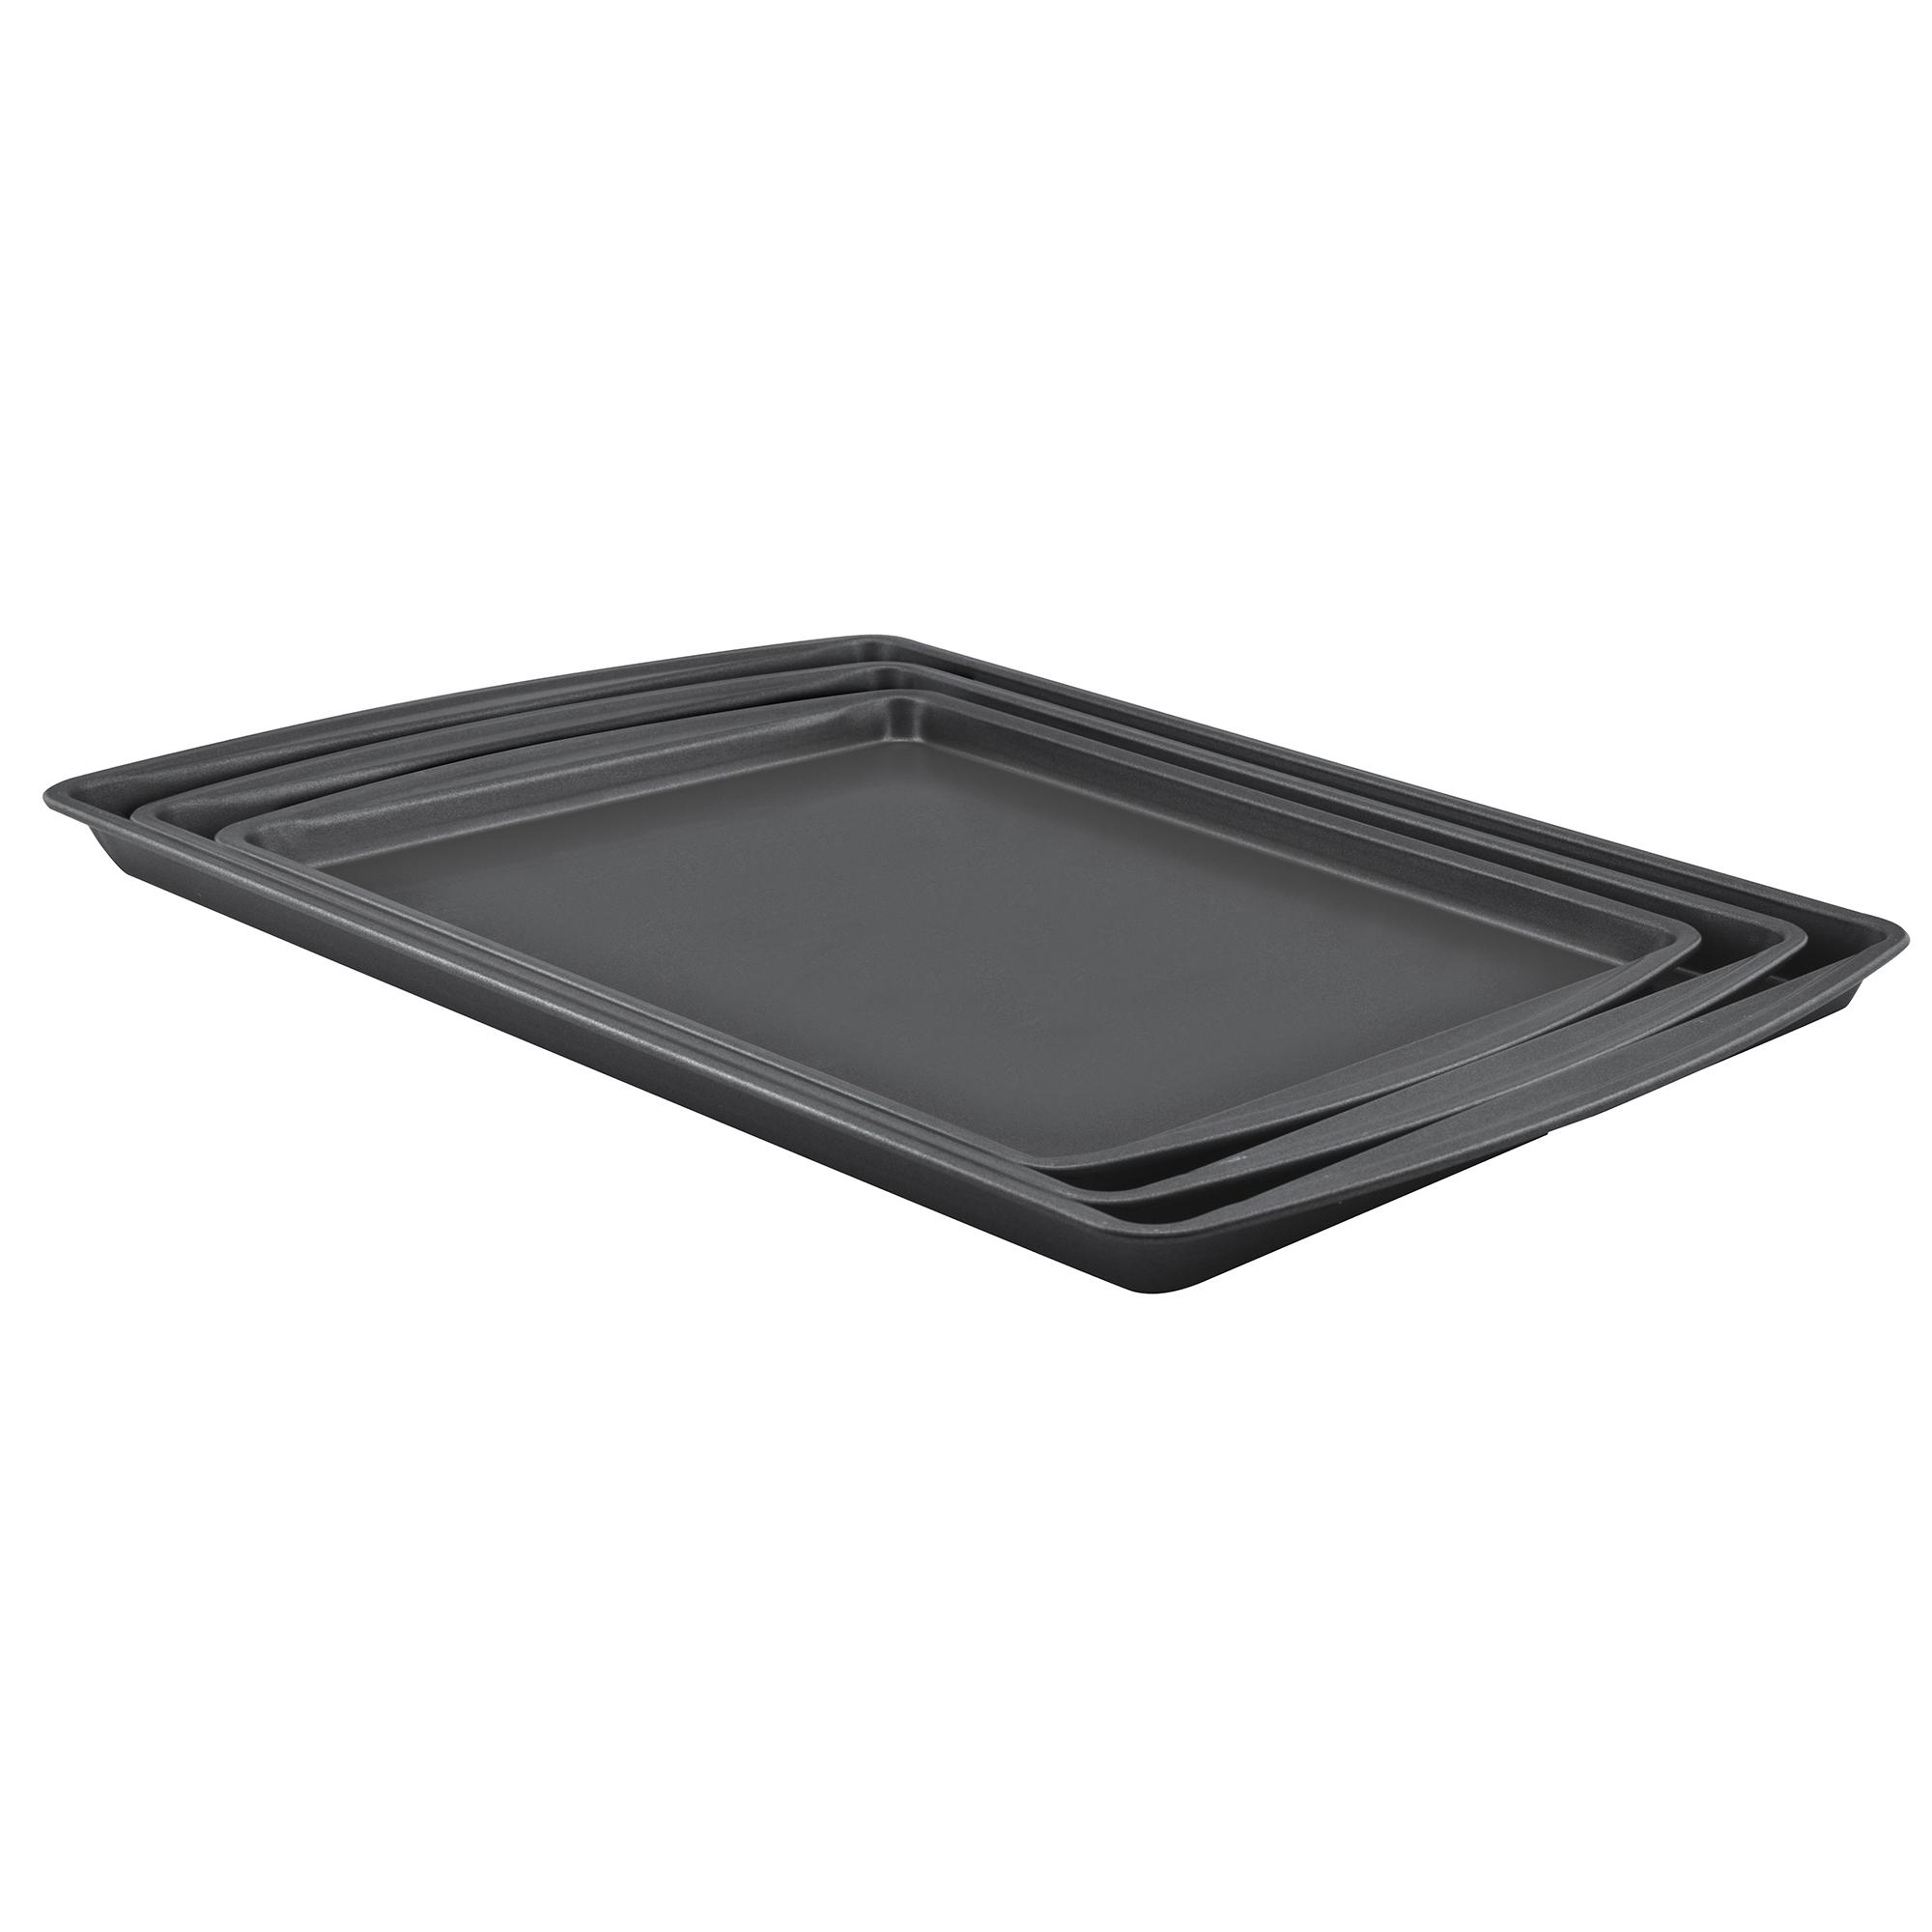 Mainstays Nonstick Cookie Sheet Set, 3 Piece Small, Medium and Large Cookie Sheet, Baking Sheet, Gray - image 1 of 6